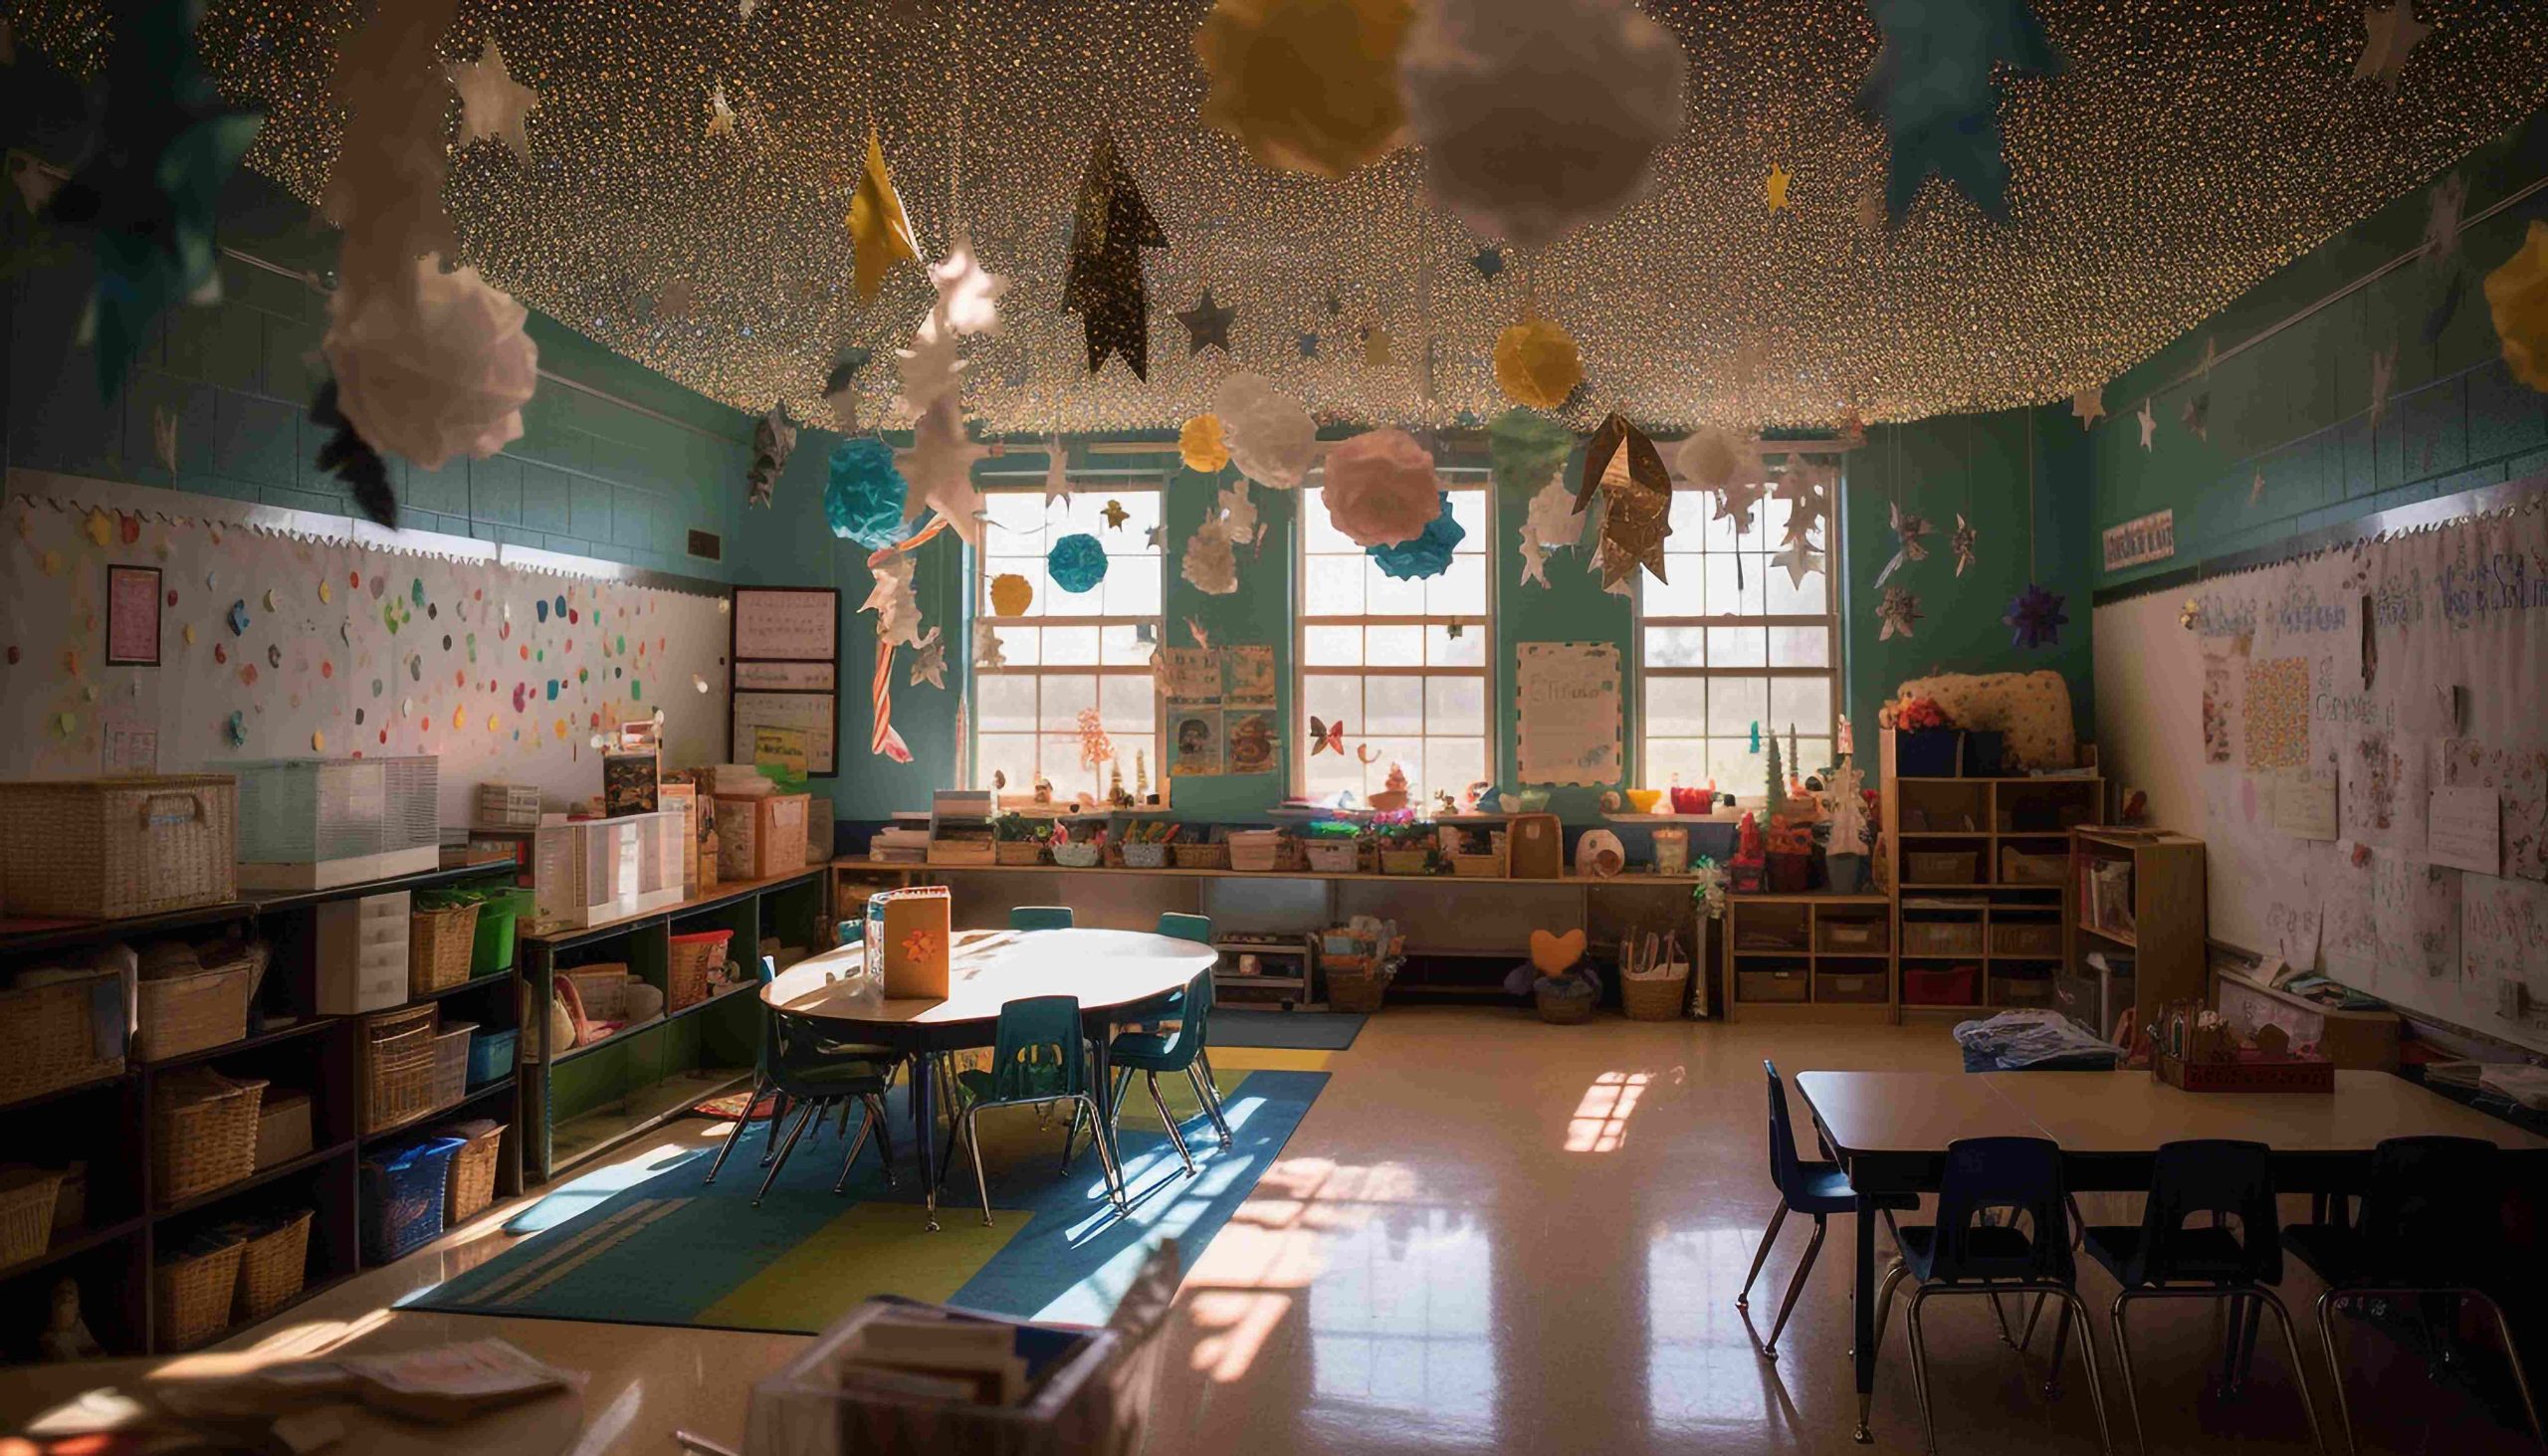 Tranquil Classroom